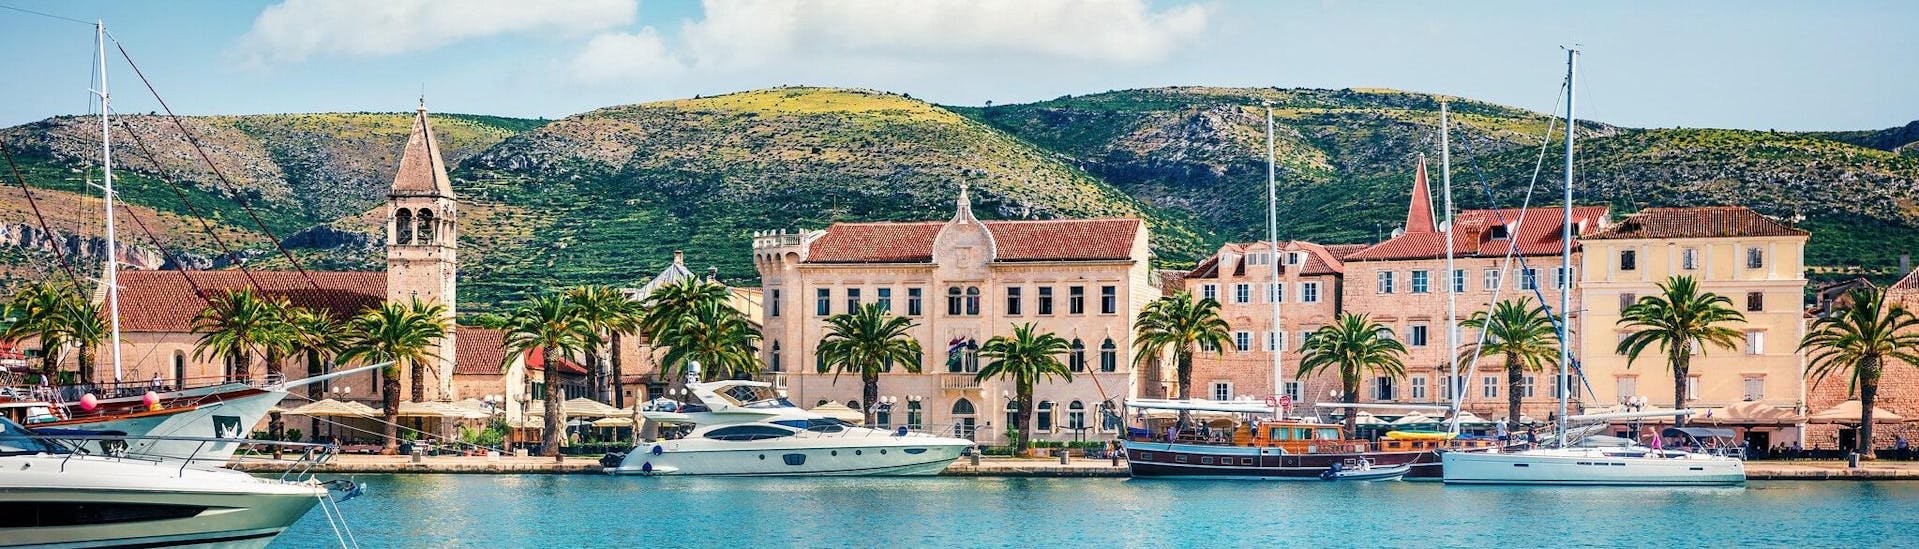 View of the port of Trogir, which is a popular starting point for boat trips in Dalmatia.